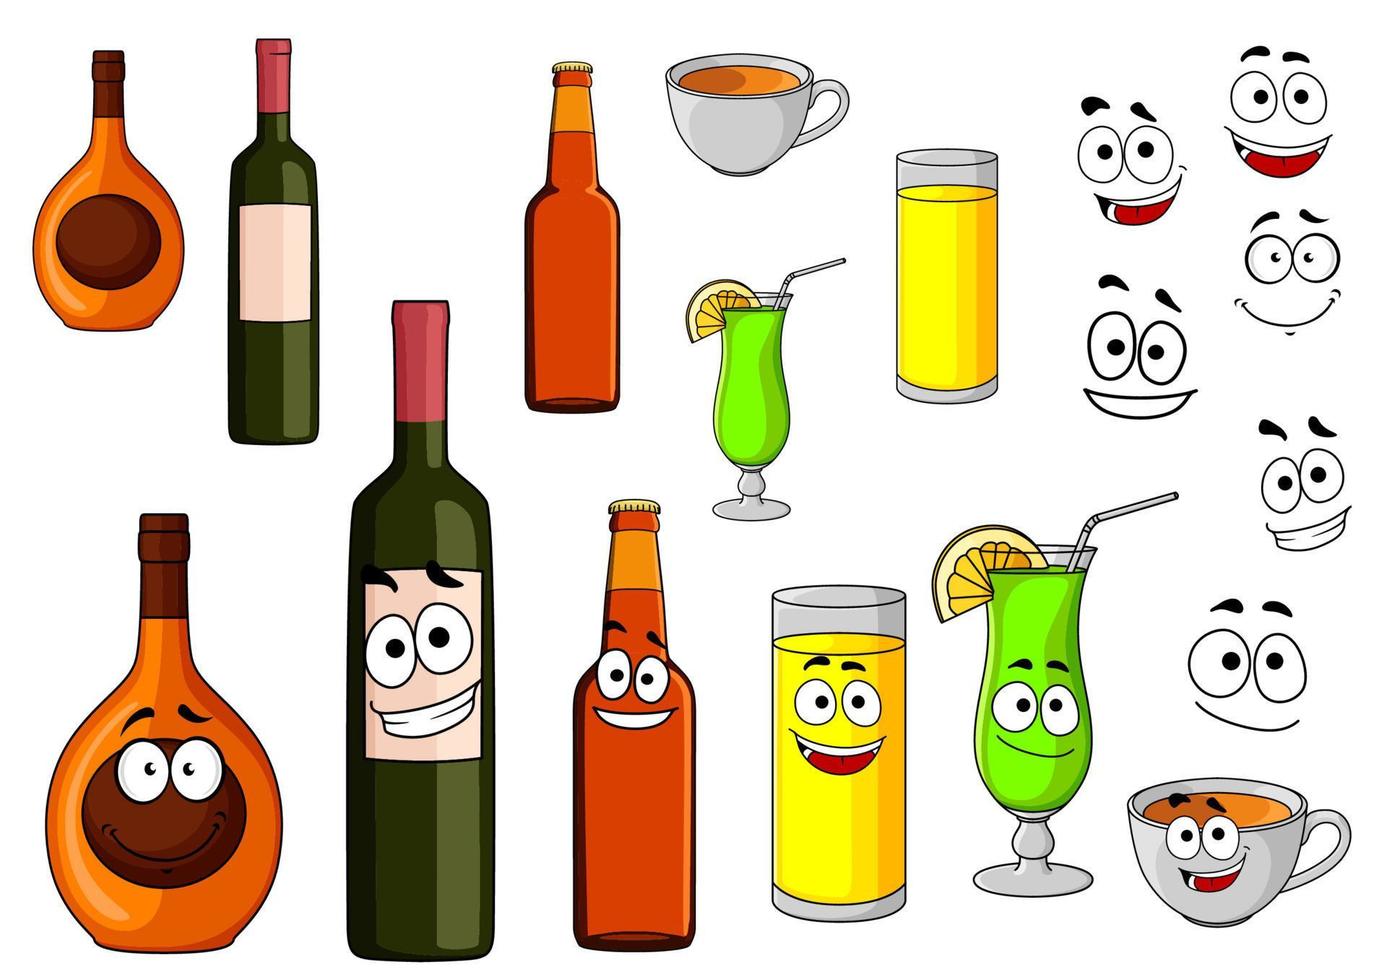 Beverage icons in cartoon style vector